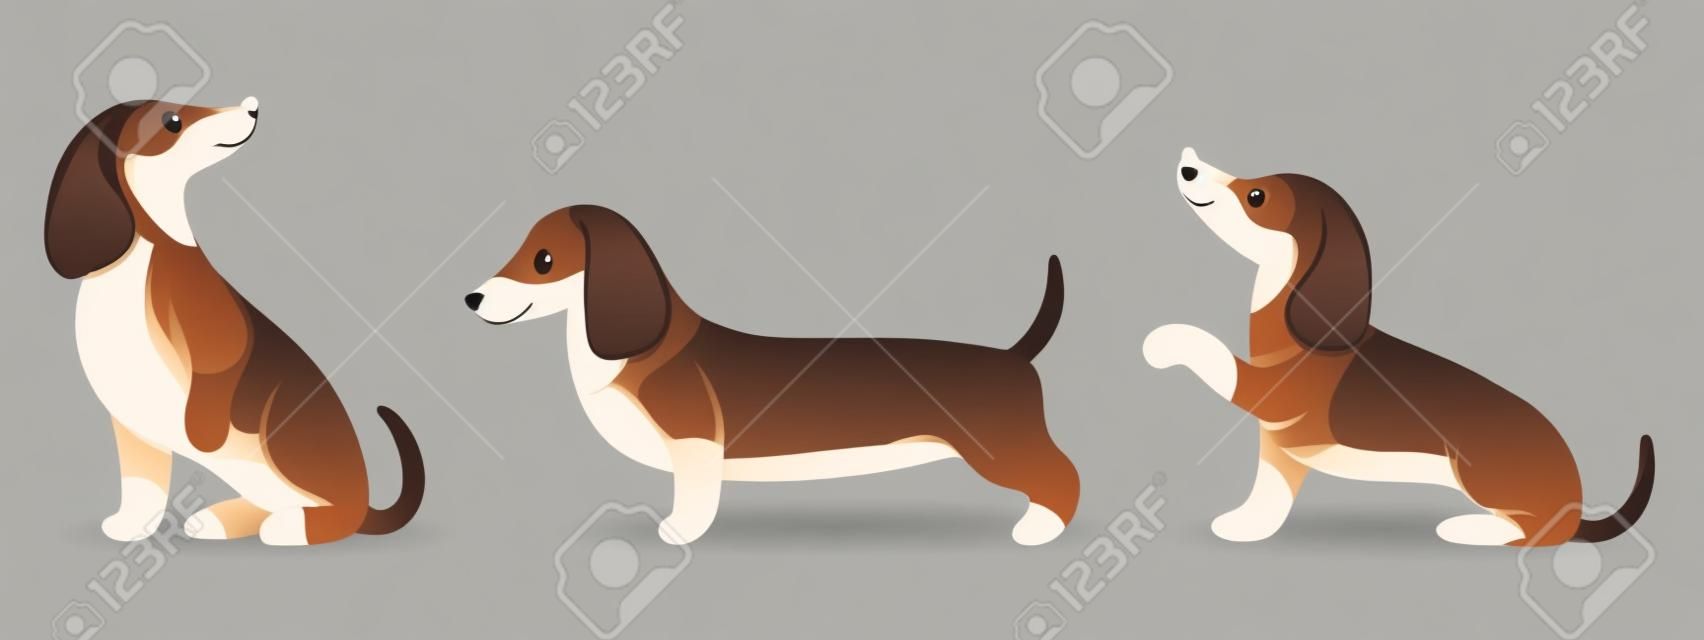 Set of cute purebred dachshunds in different poses. Illustration in cartoon style, vector